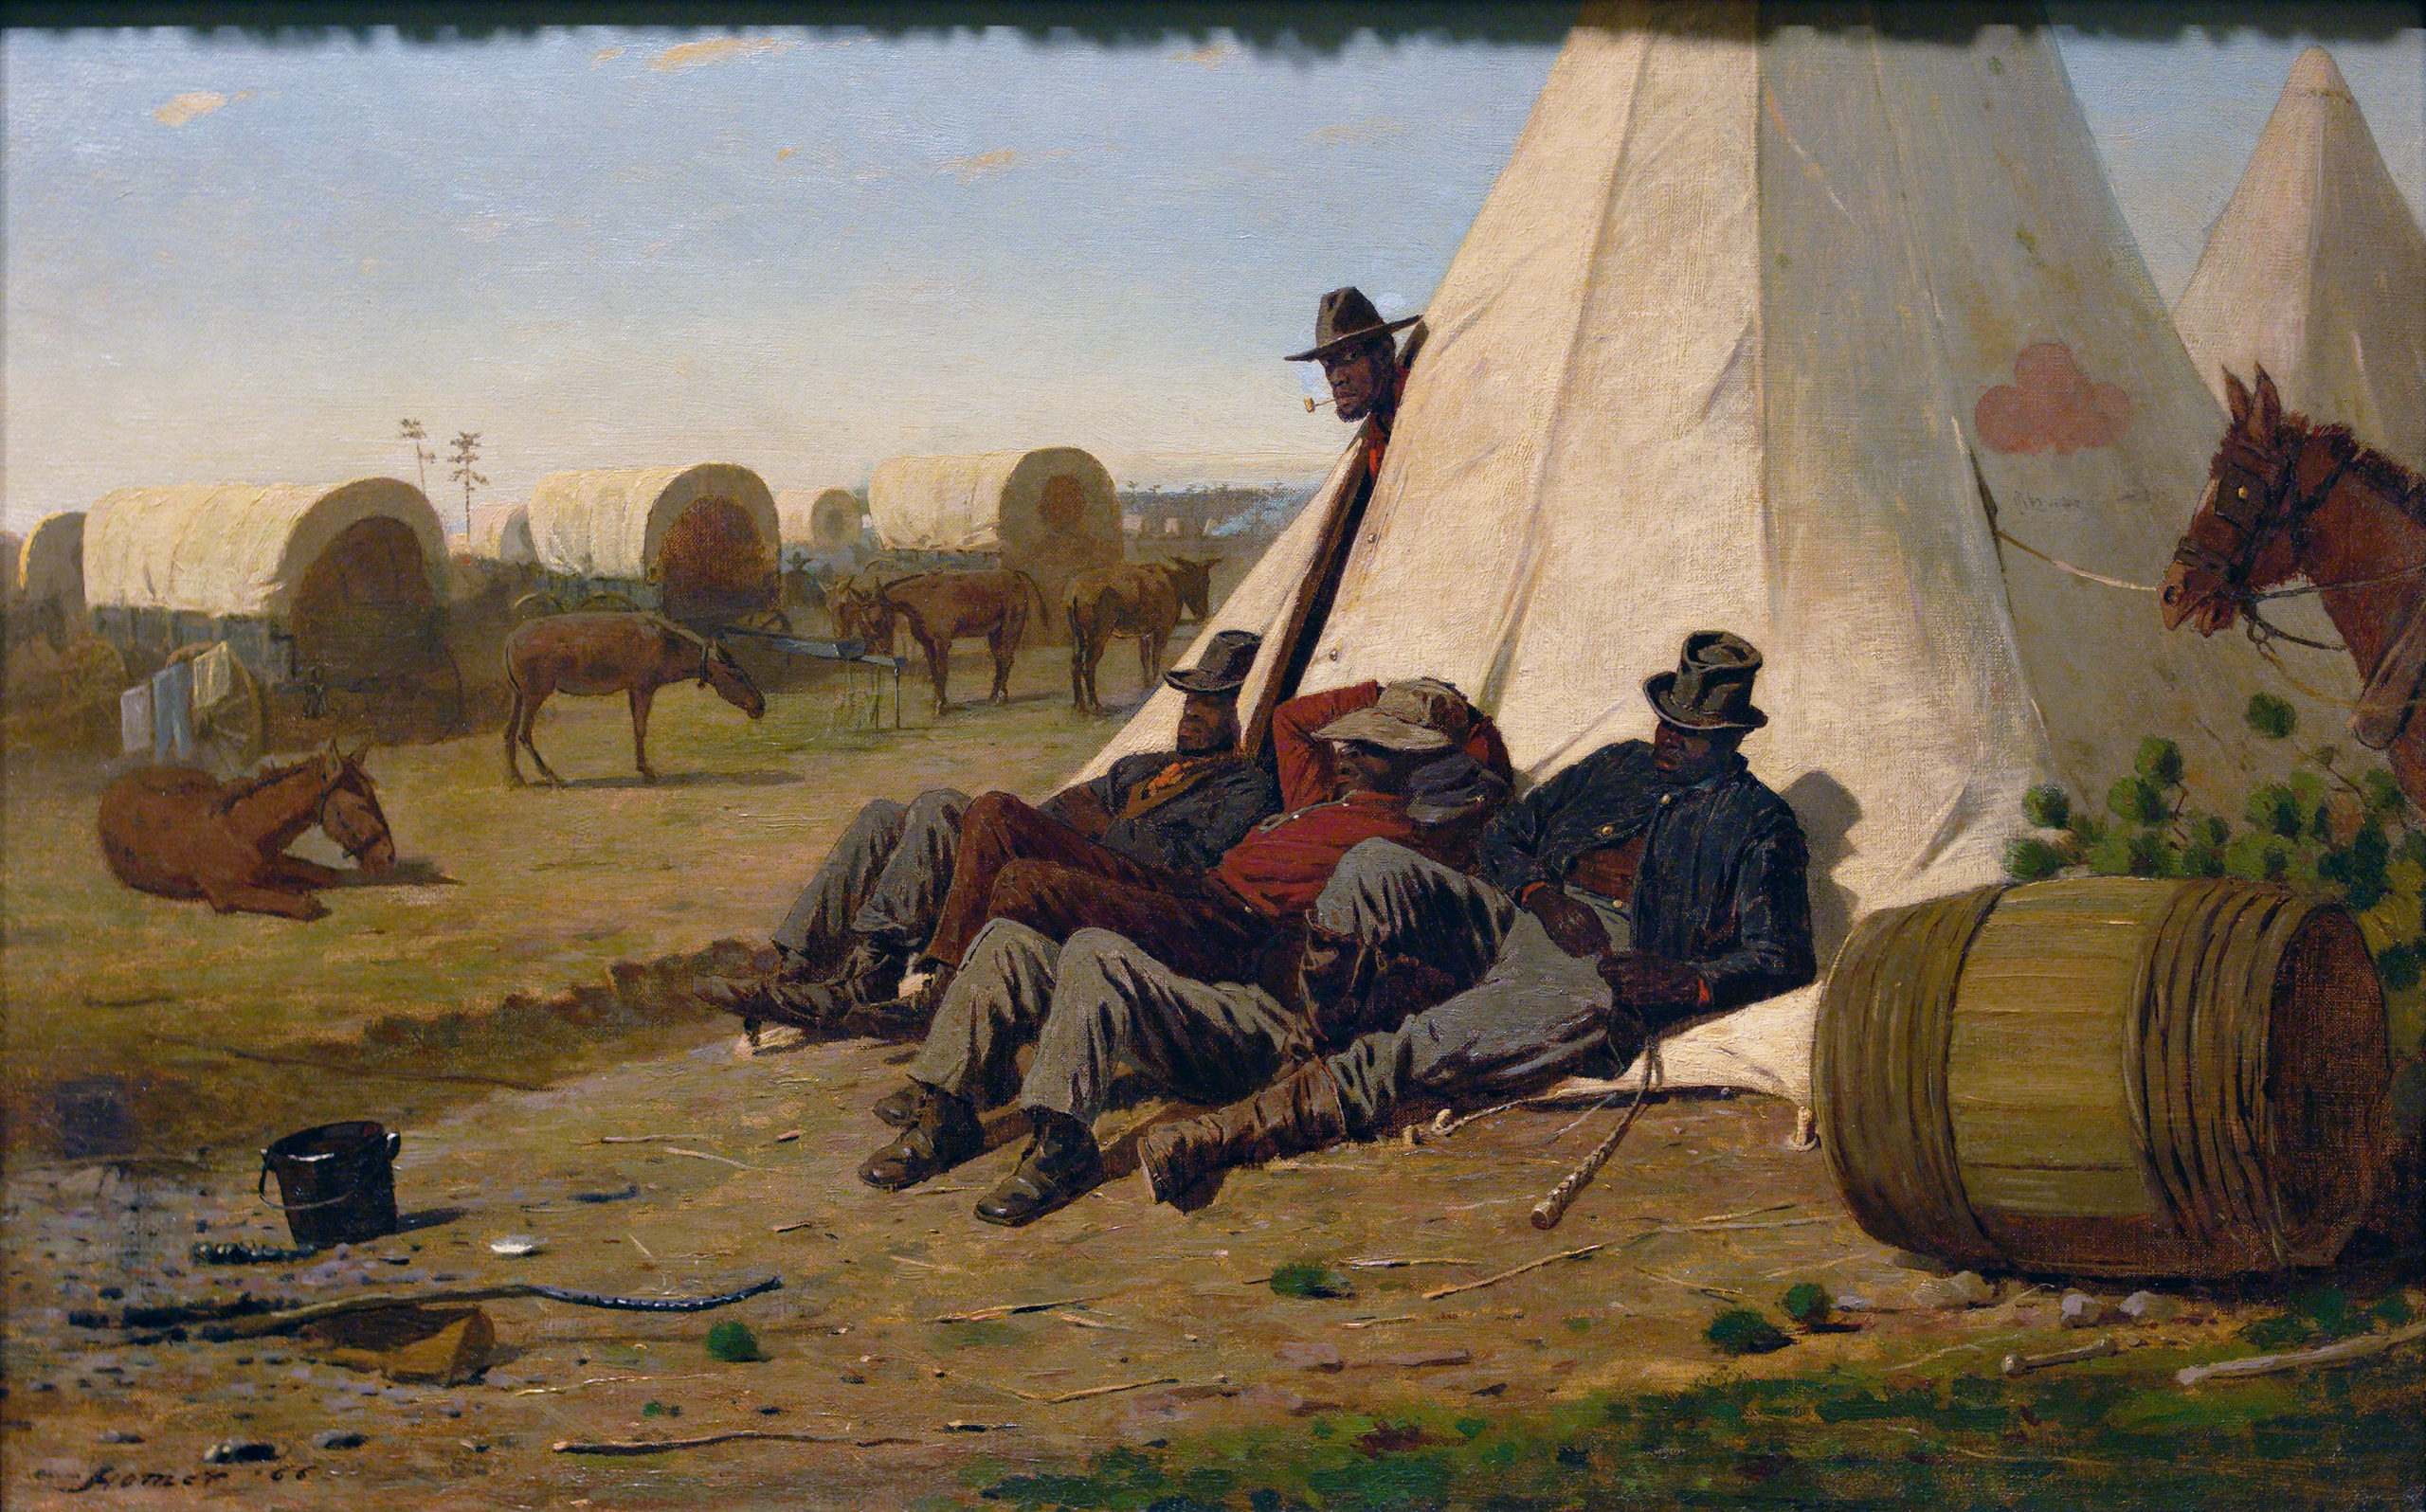 Winslow Homer, Army Teamsters, 1866, oil on canvas, 45.72 x 72.39 cm (Virginia Museum of Fine Arts, Richmond)